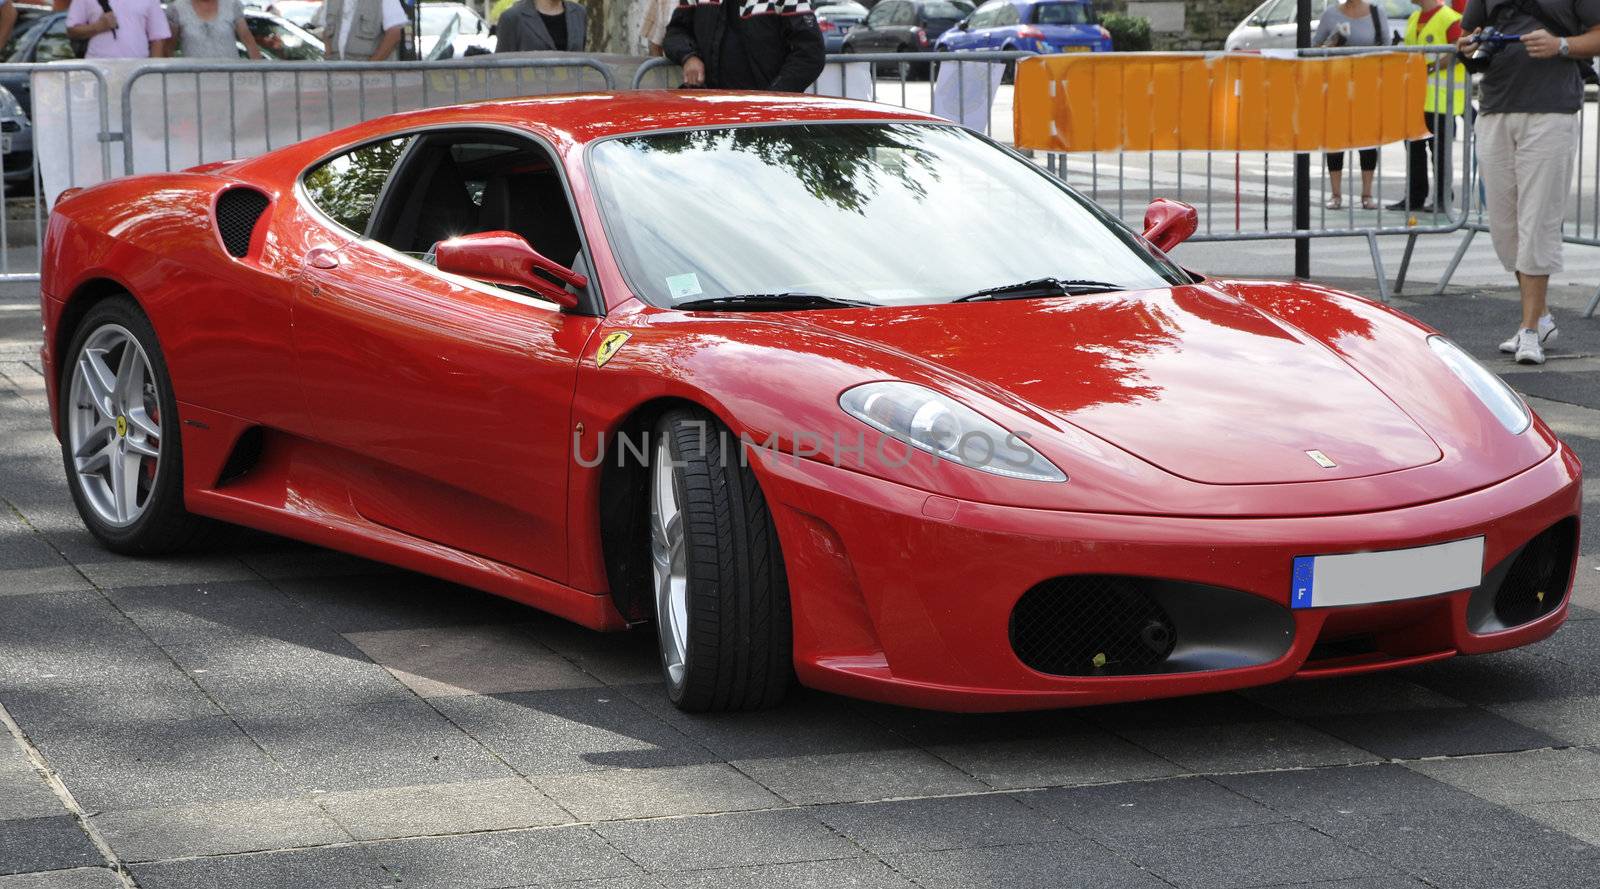 Front view of a F430 Ferrari by shkyo30